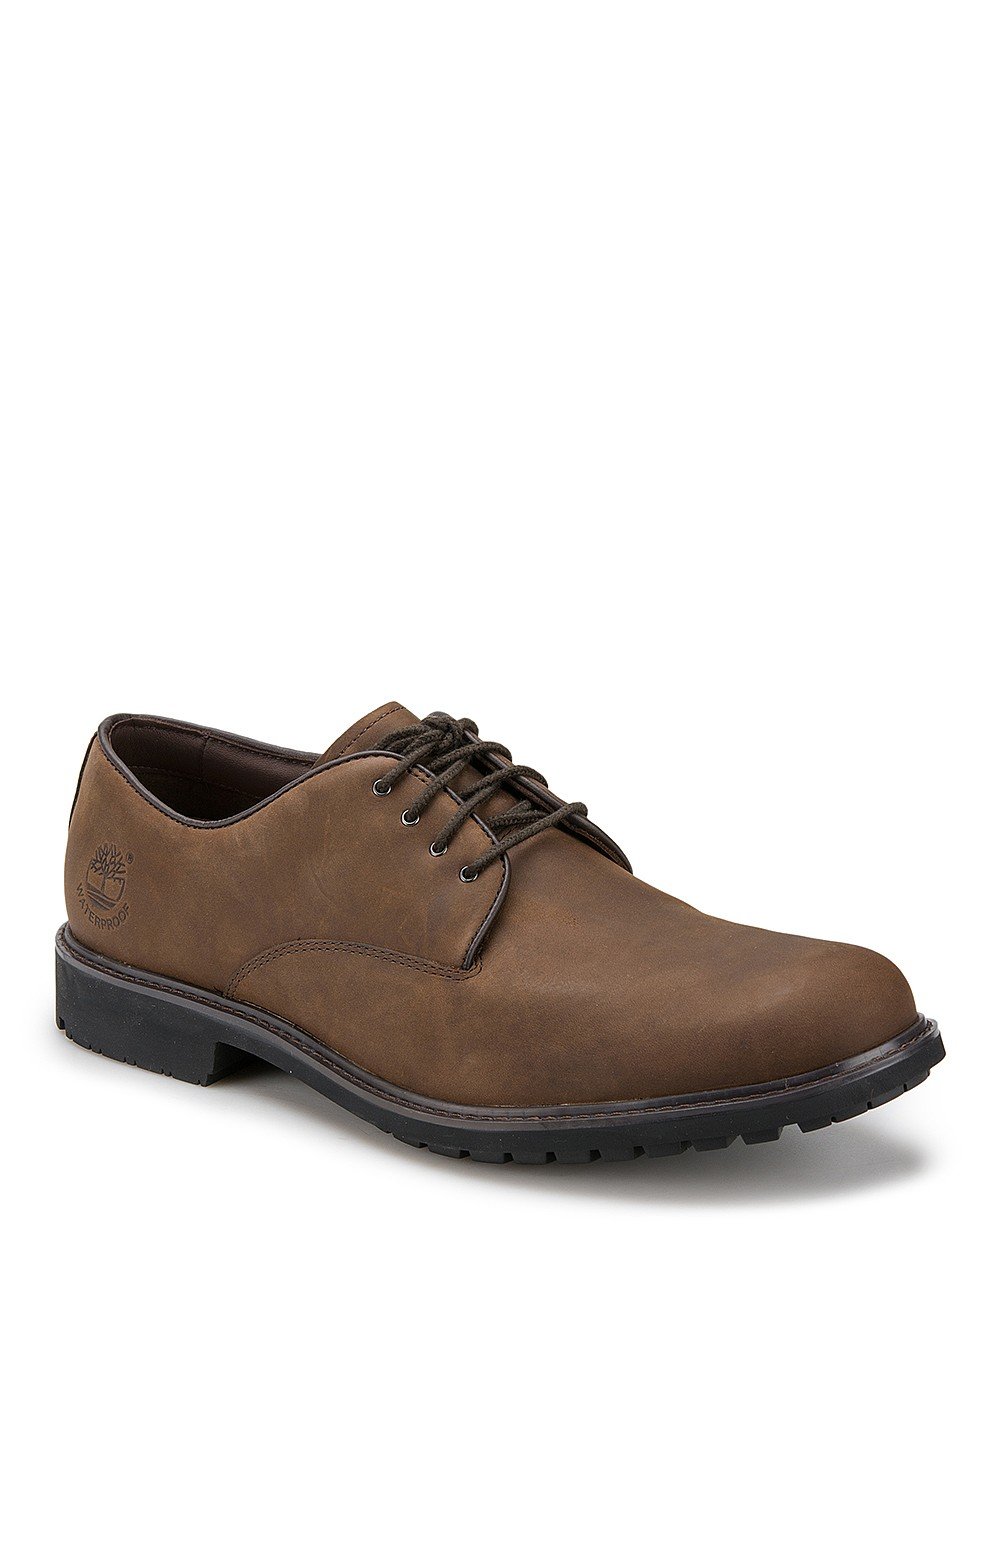 timberland oxford sneakers